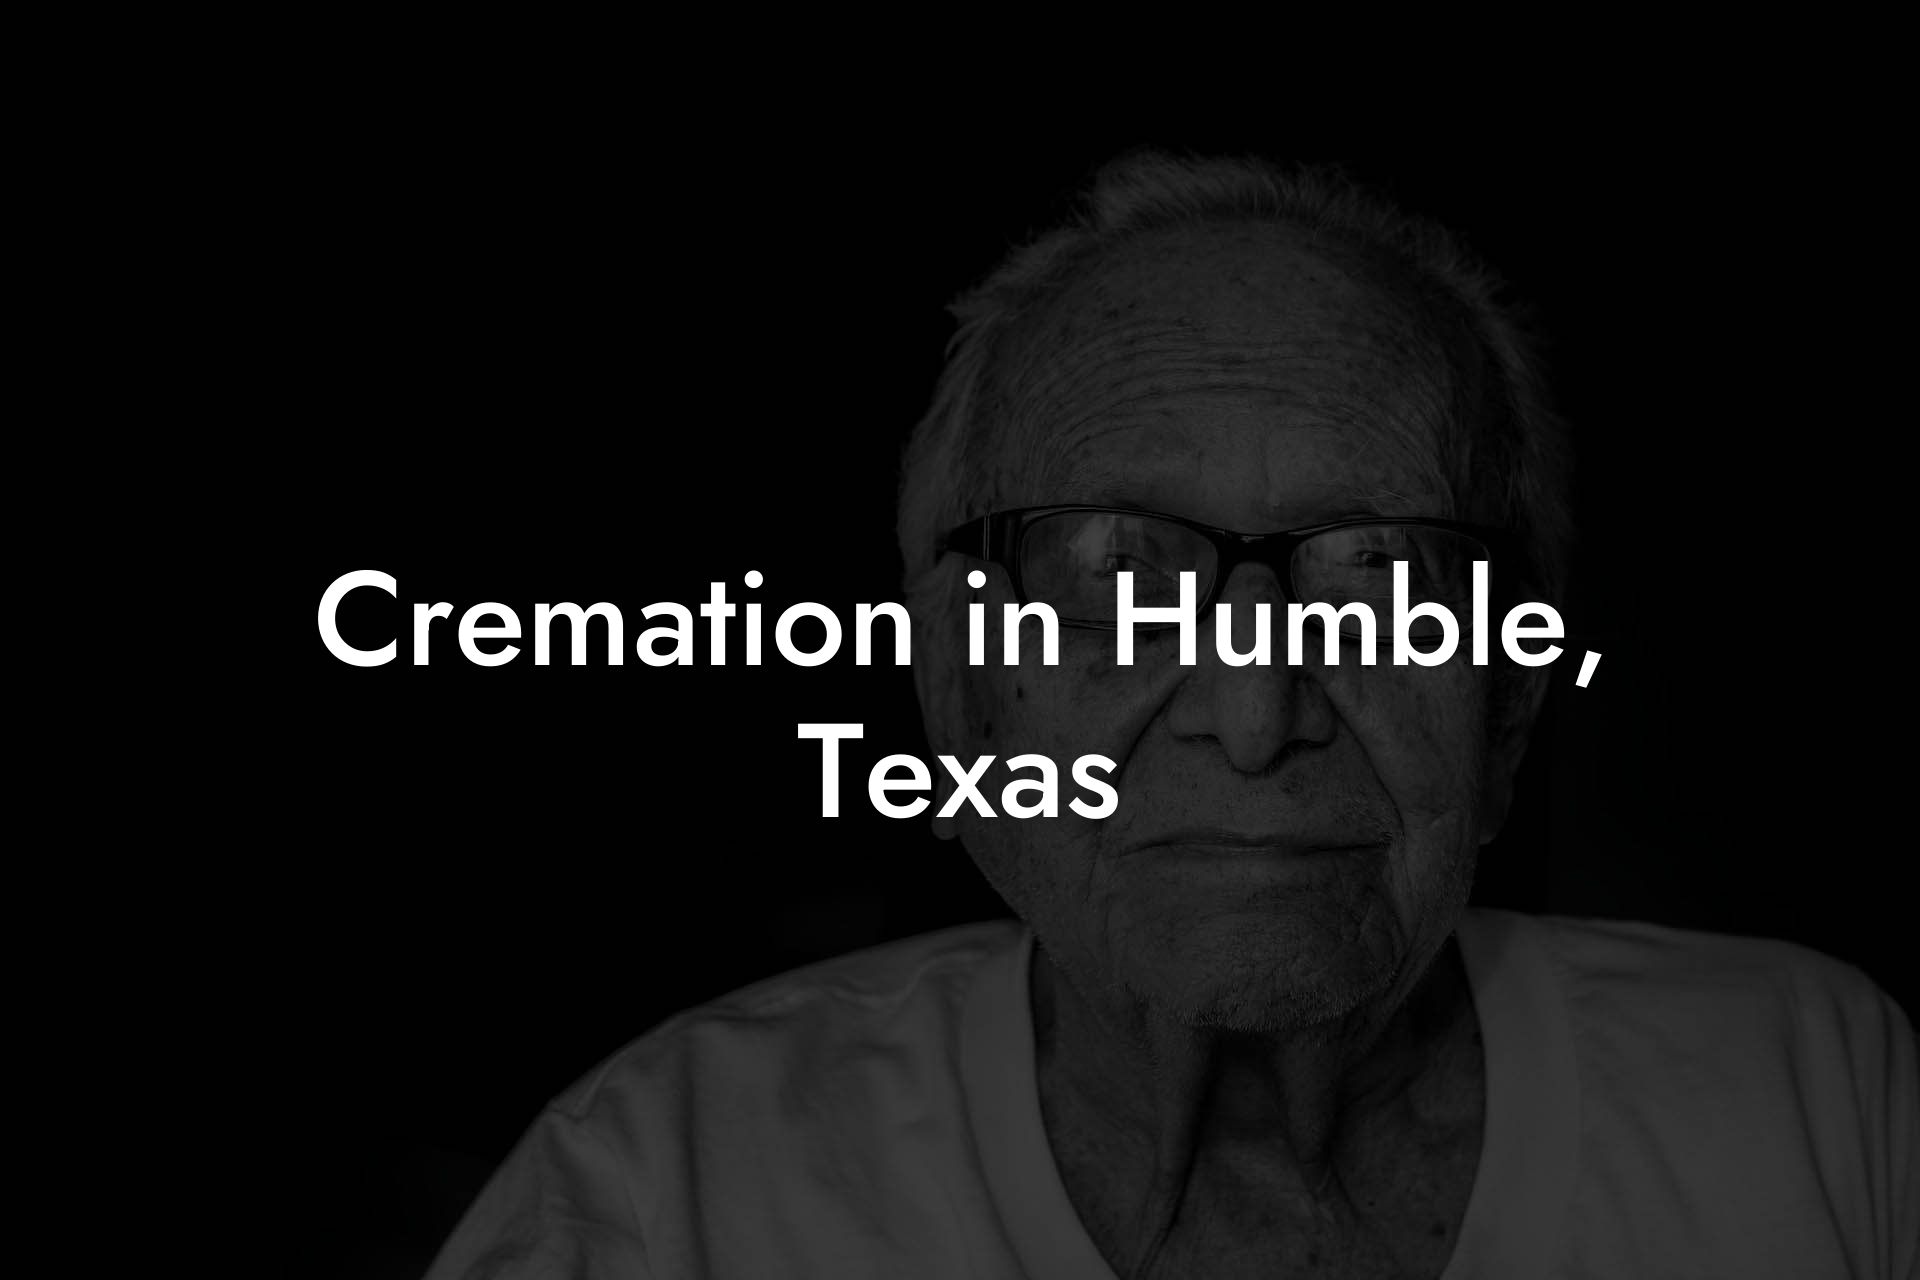 Cremation in Humble, Texas